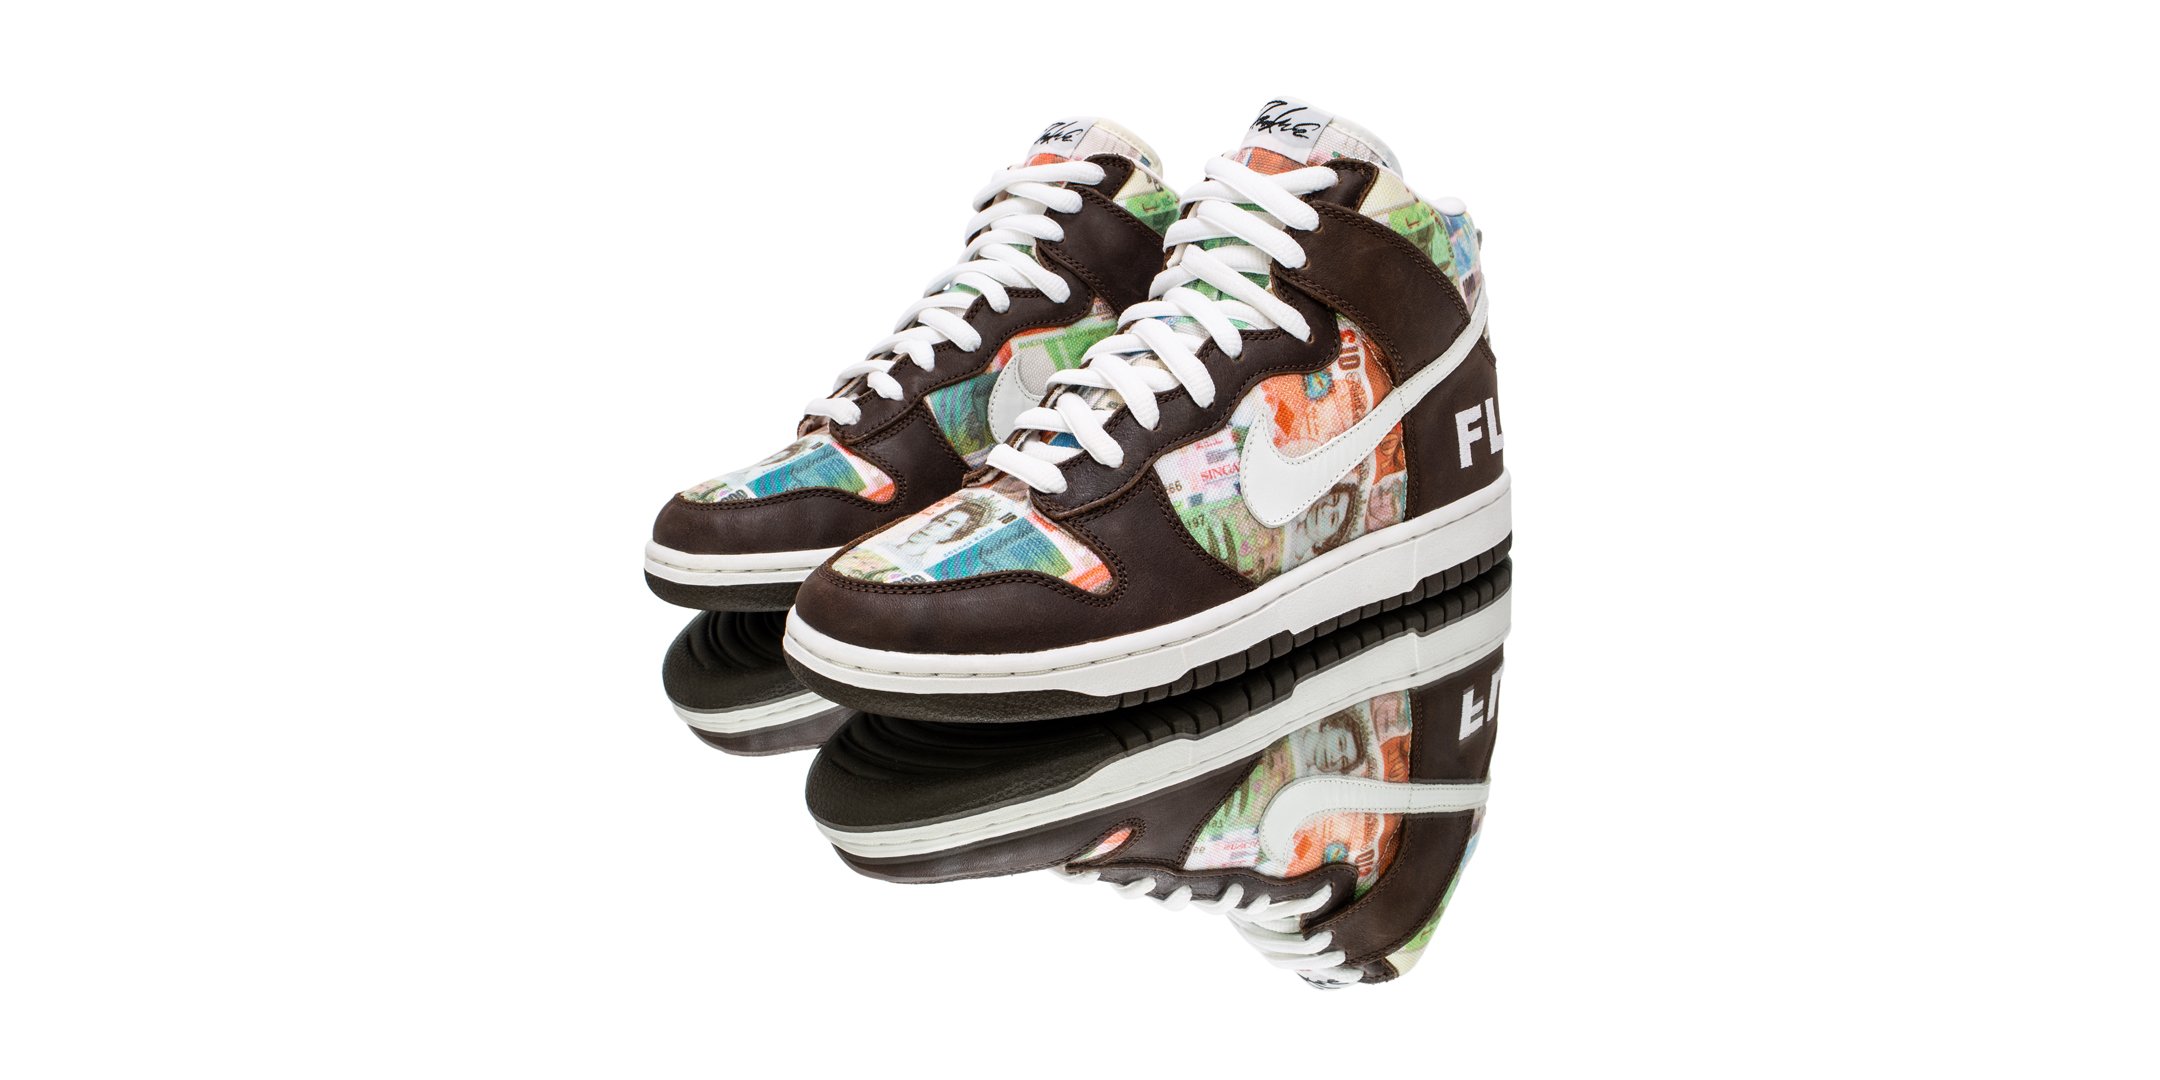 Espejismo martes Idealmente Flight Club on Twitter: "The highly regarded "For Love or Money" Nike SB  Dunk was designed by NYC-based artist, Futura, in 2005 with a distinctive  design that features a round-up of global